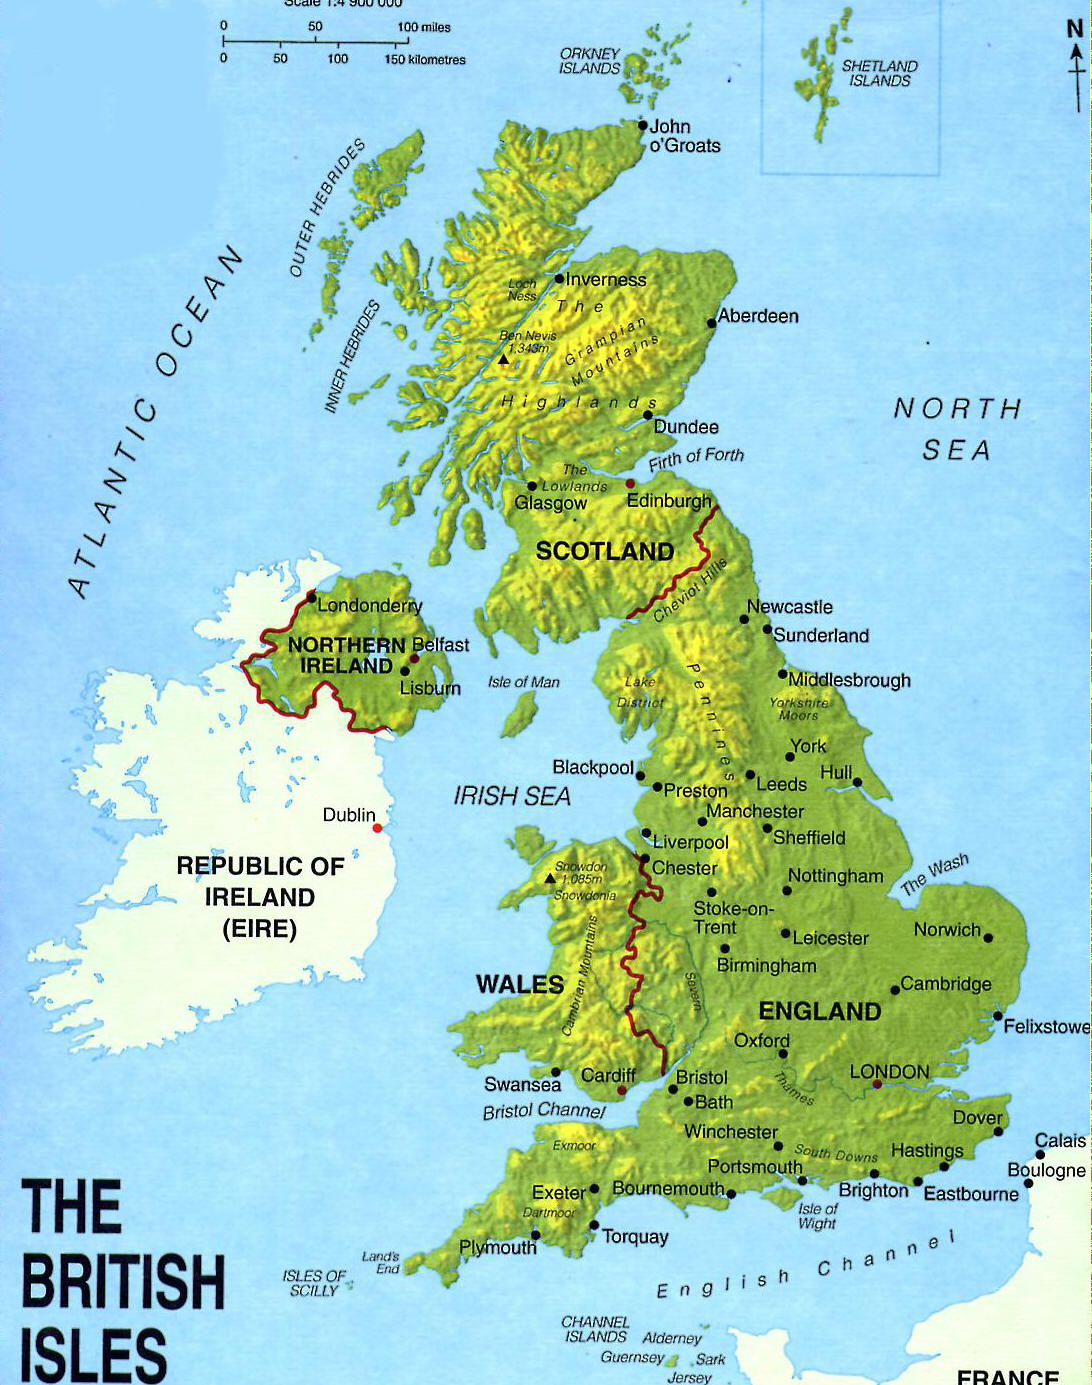 Реферат The United Kingdom Of Great Britain